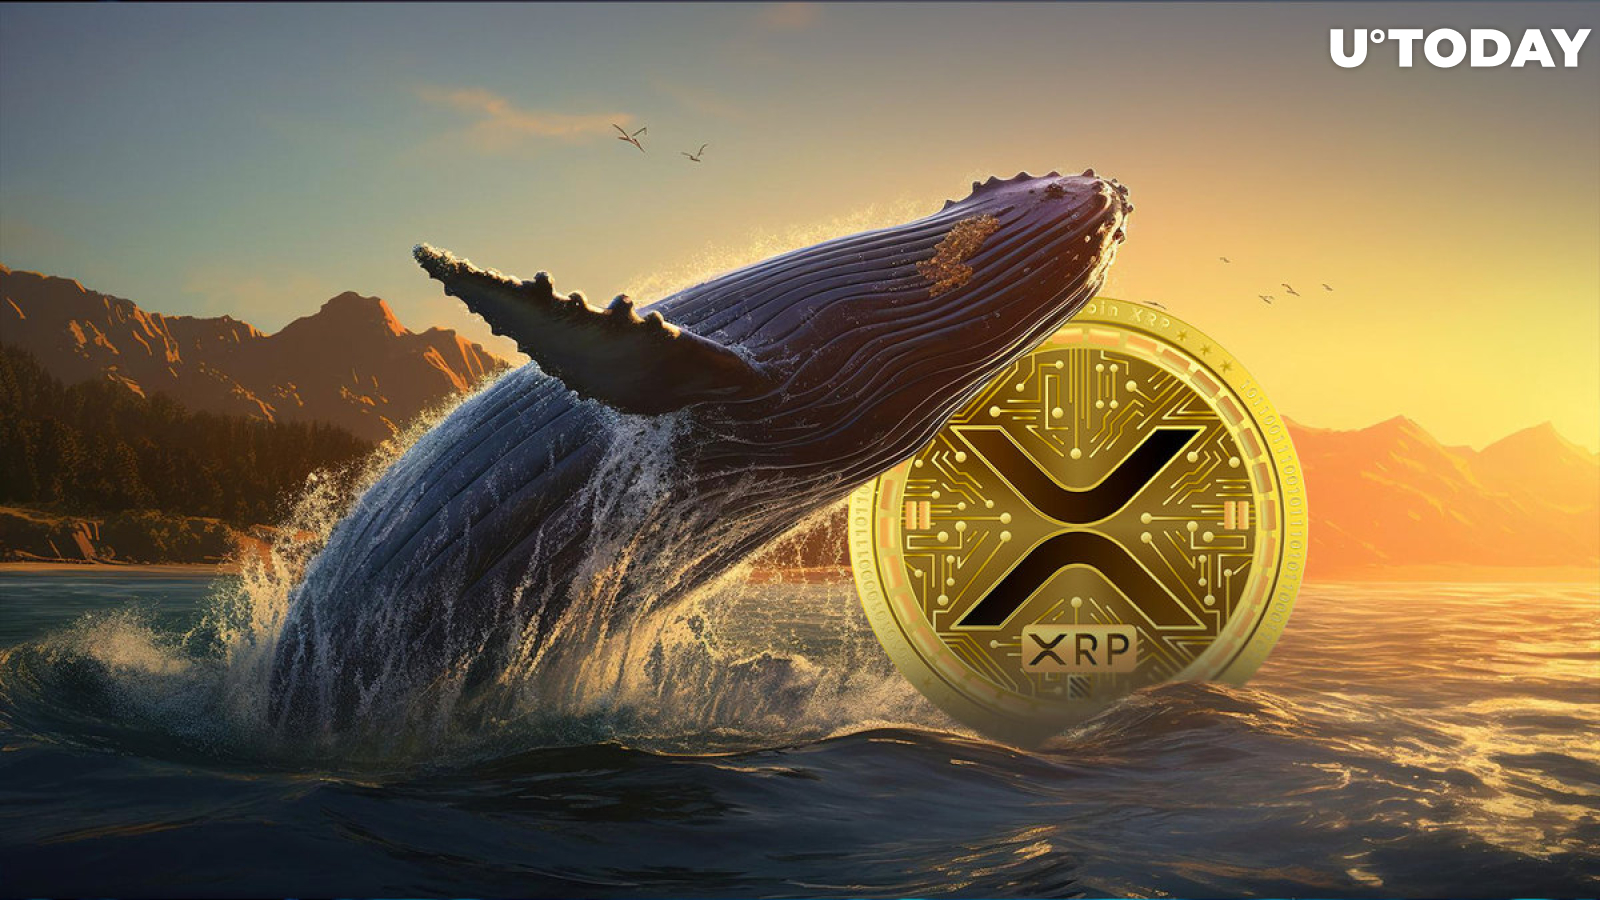 XRP Whales Are Responsible for This 23% Price Increase, But There's More